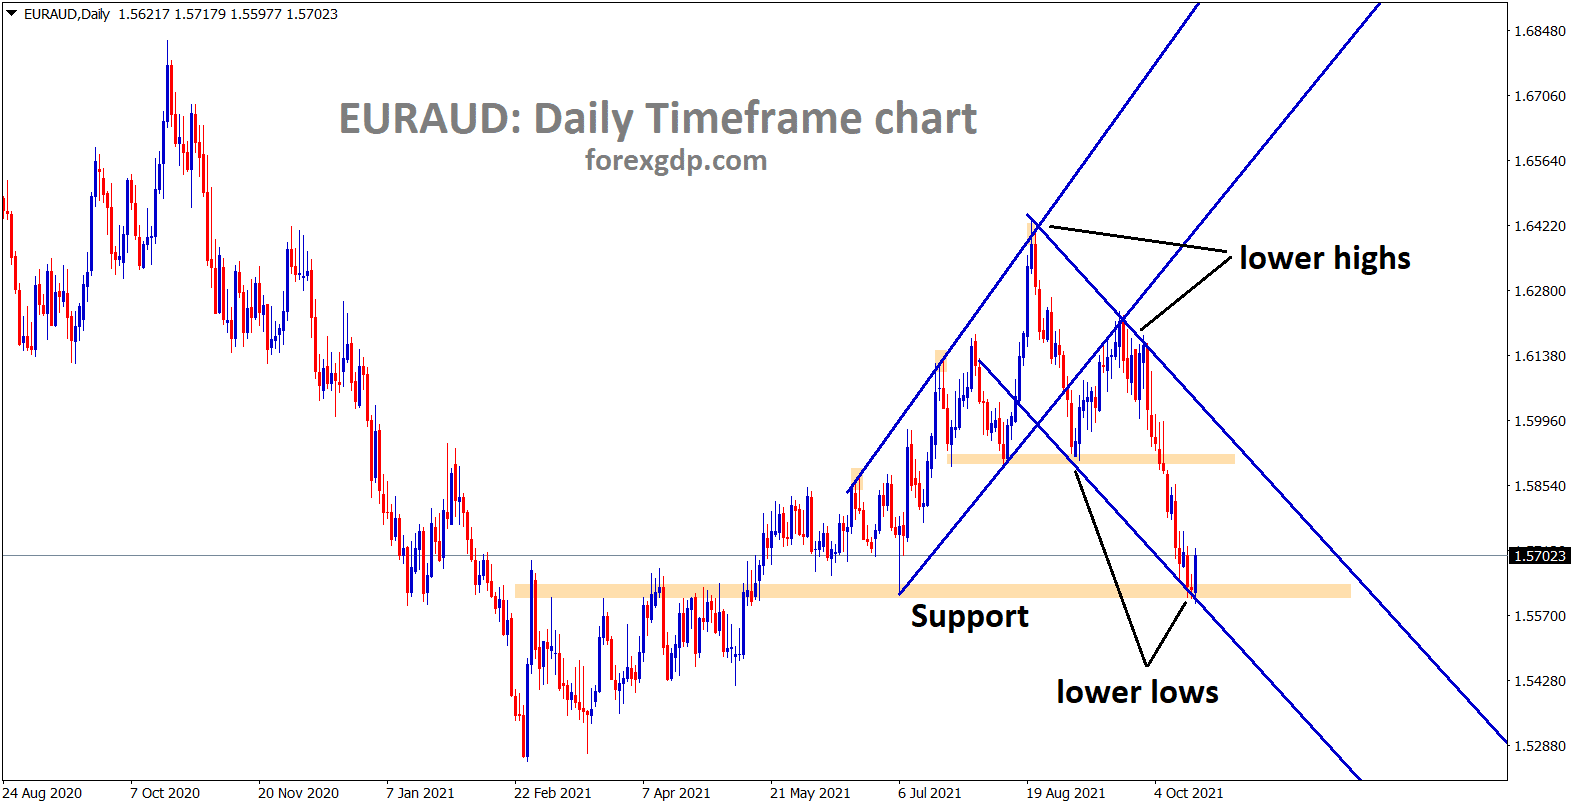 EURAUD is rebounding from the support area and the lower low level of the descending channel 1